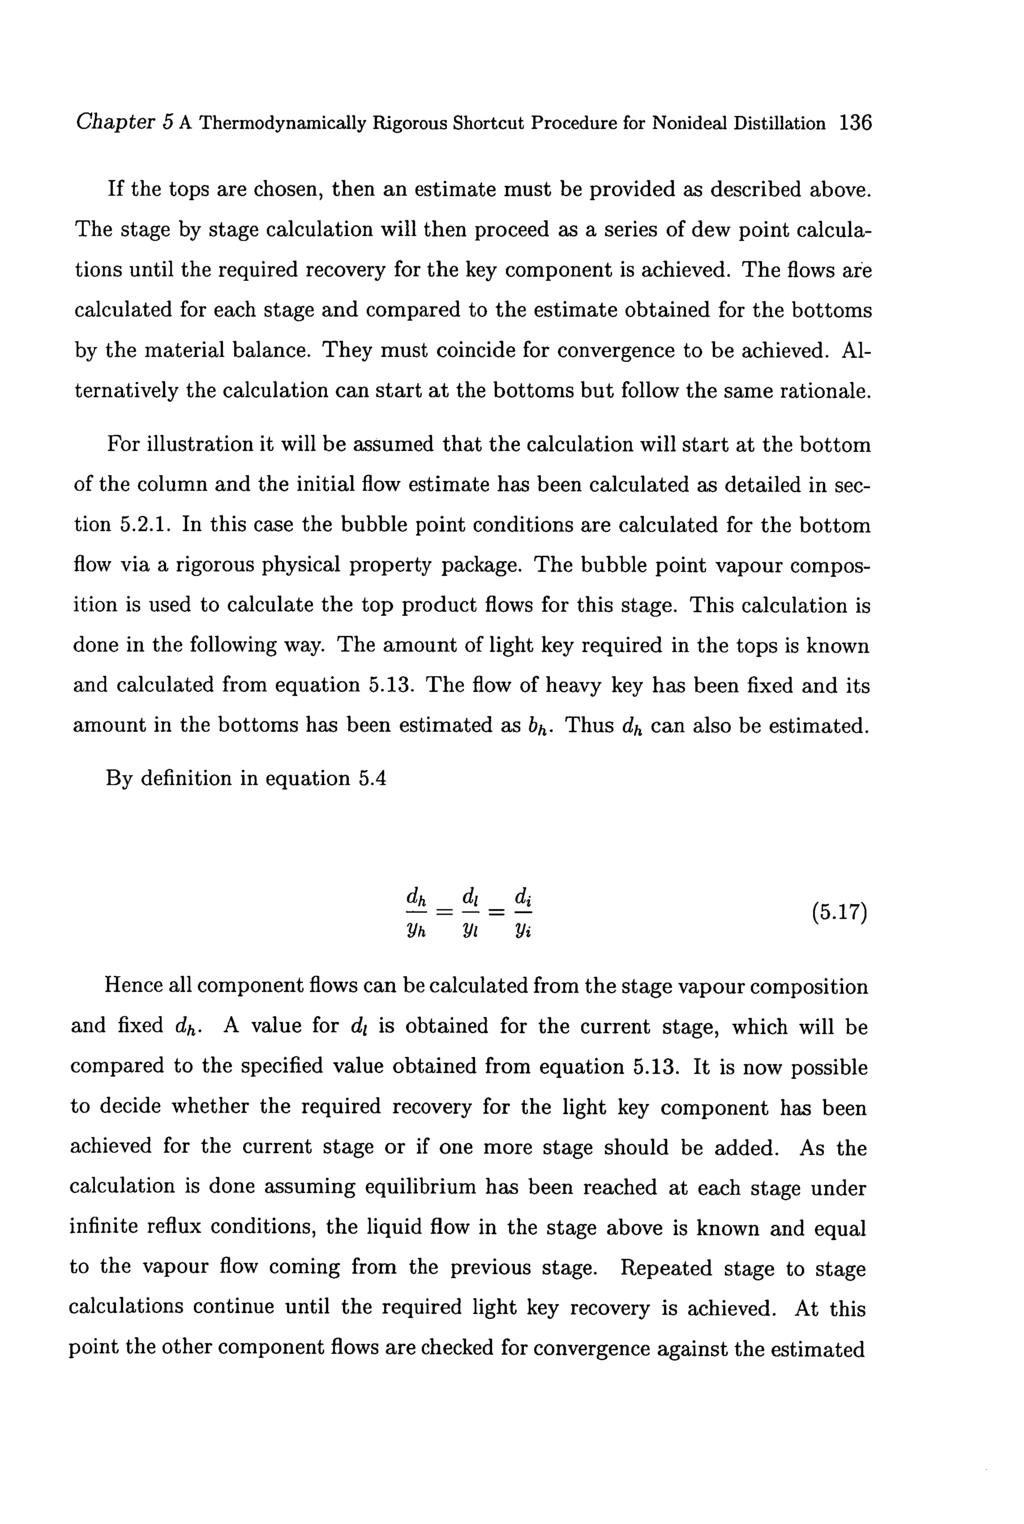 Chapter 5 A Thermodynamically Rigorous Shortcut Procedure for Nonideal Distillation 136 Tithe tops are chosen, then an estimate must be provided as described above.